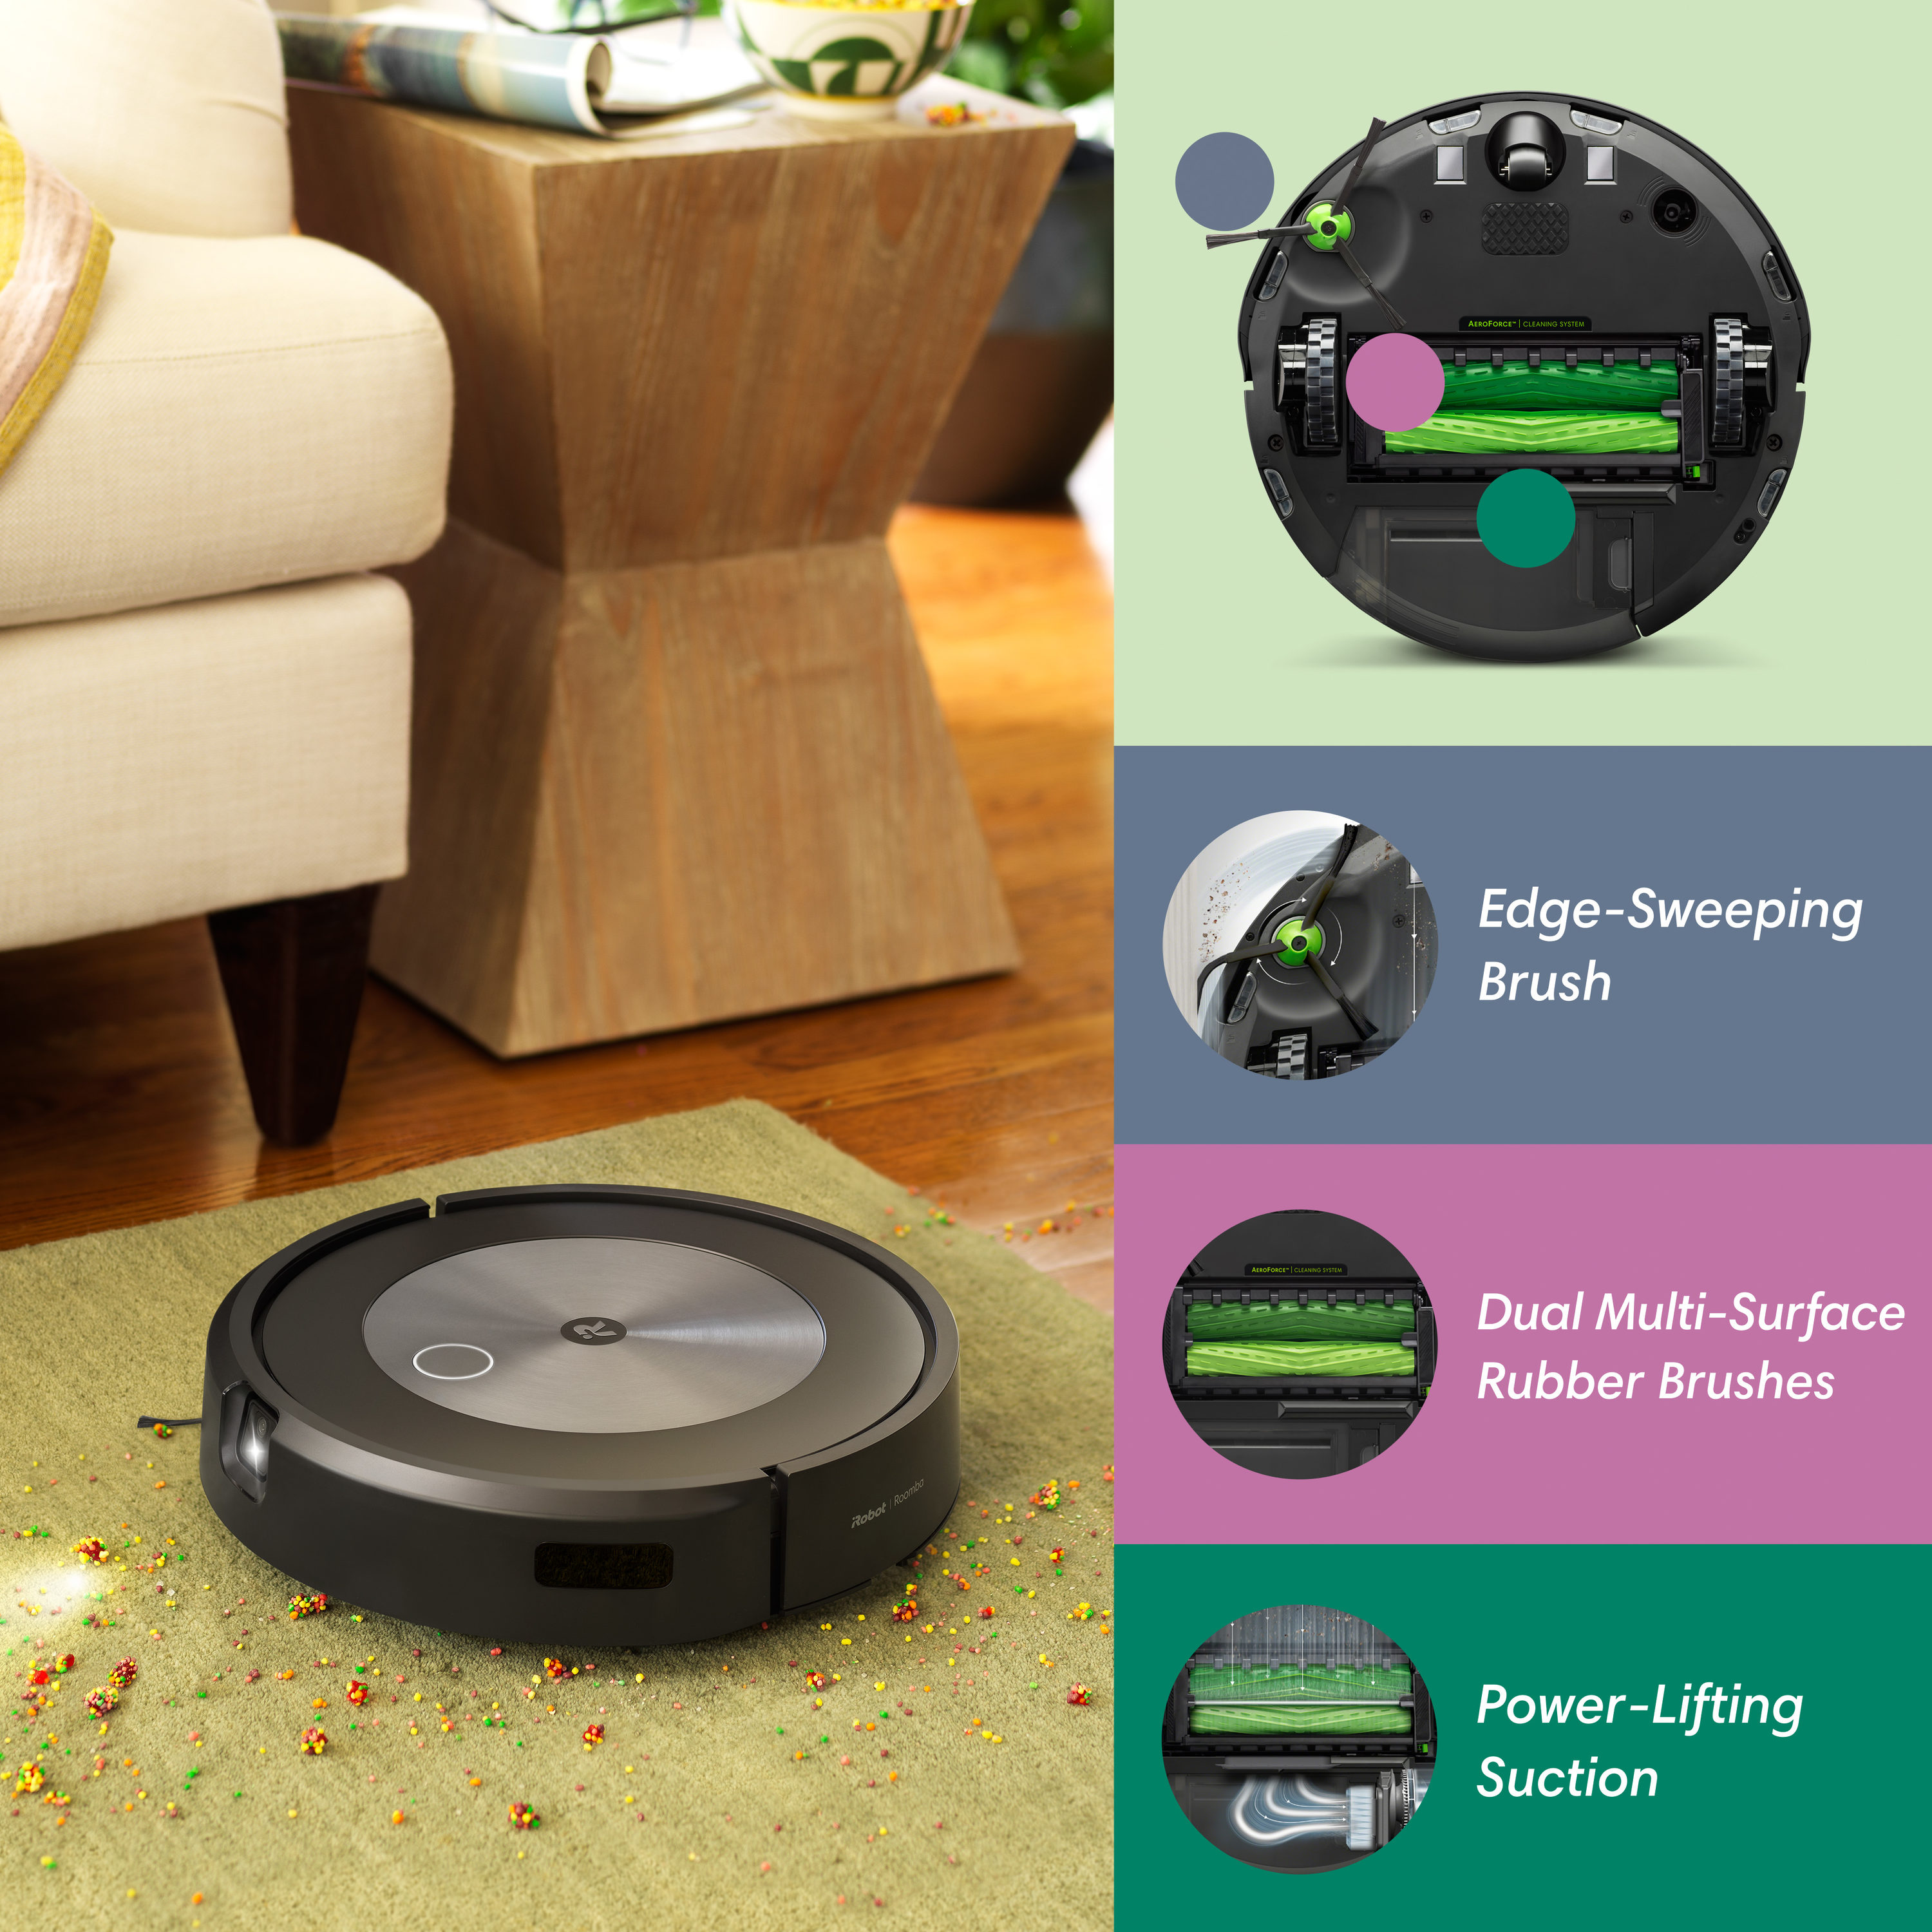  Birsppy Soule Robot Vacuum and Mop, Automatic Dirt